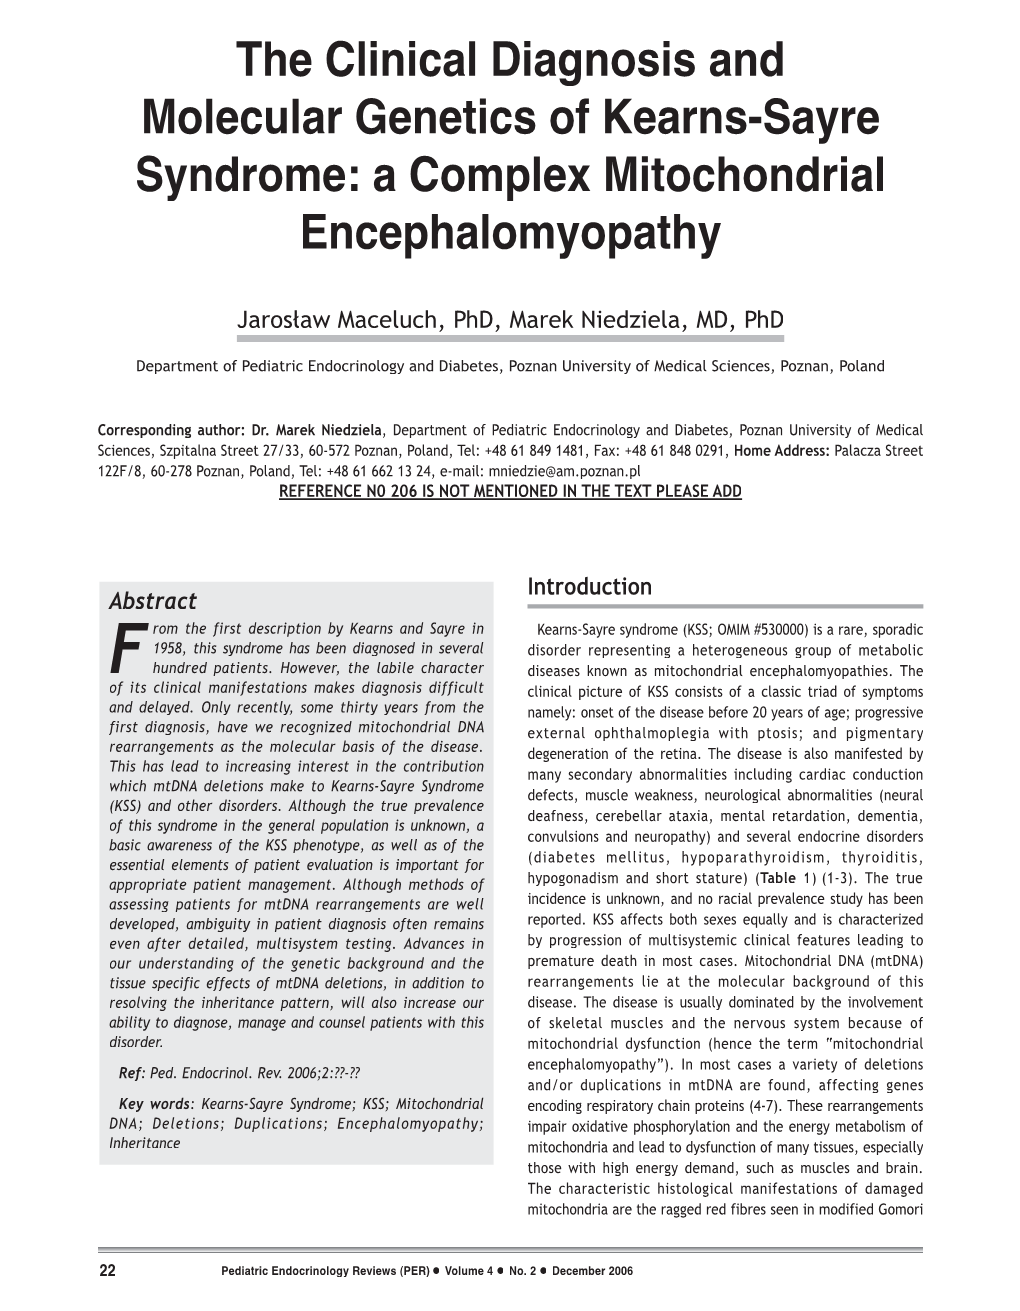 The Clinical Diagnosis and Molecular Genetics of Kearns-Sayre Syndrome: a Complex Mitochondrial Encephalomyopathy